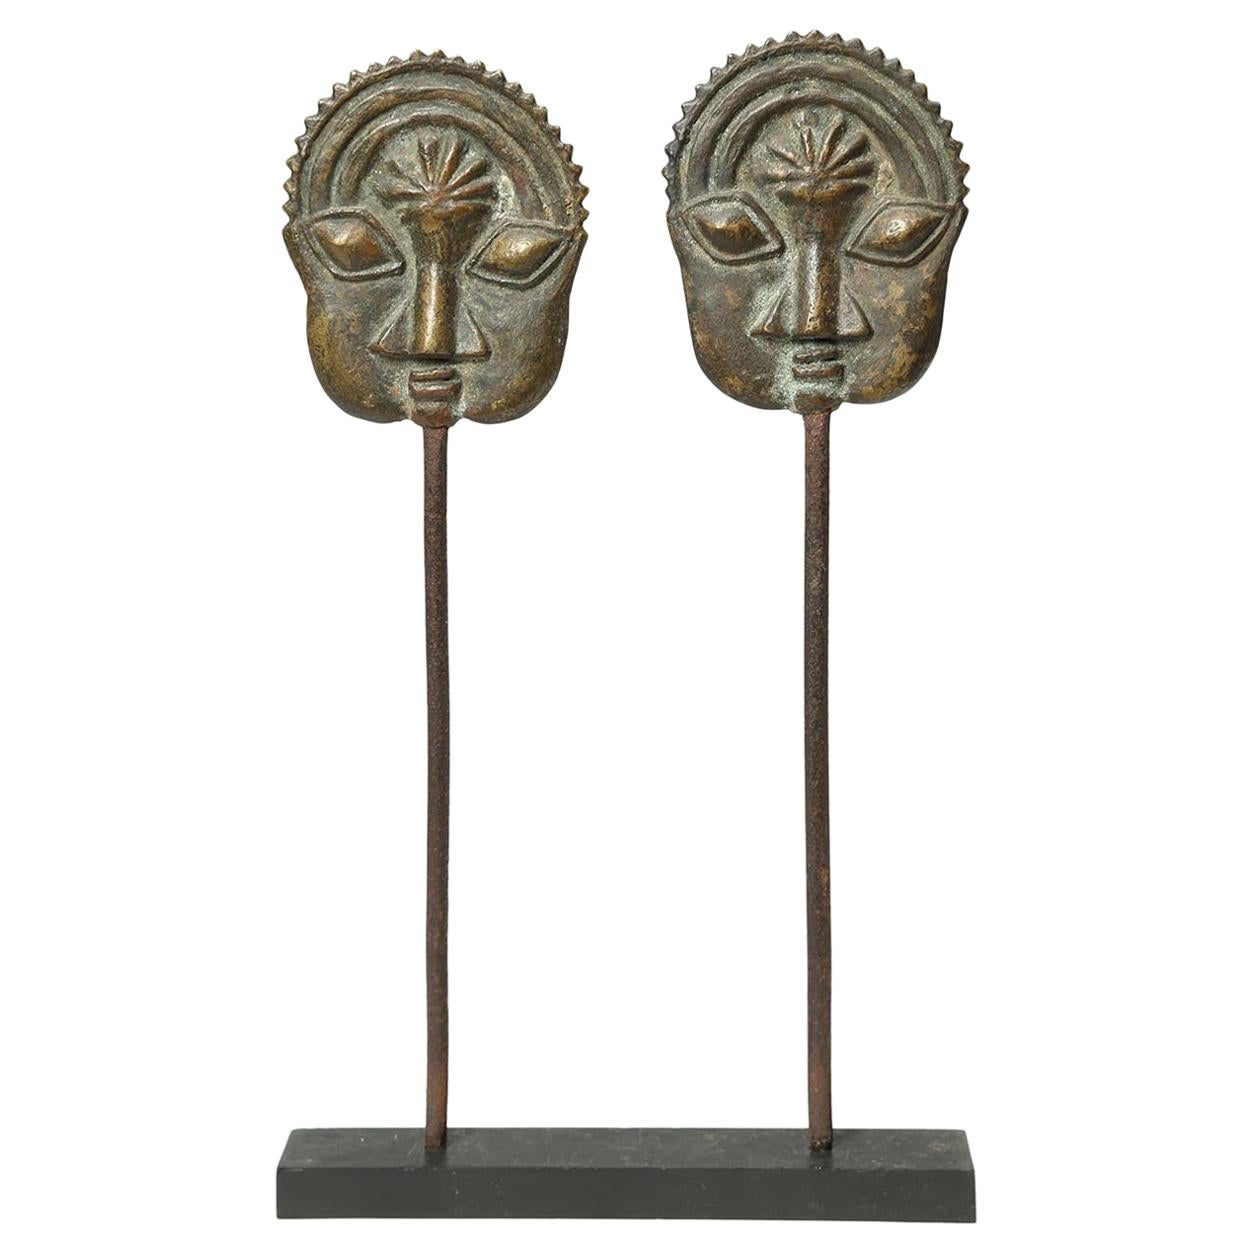 Yoruba Tribal Ogboni Pair of Brass Pins with Faces, Nigeria Early 20th Century For Sale